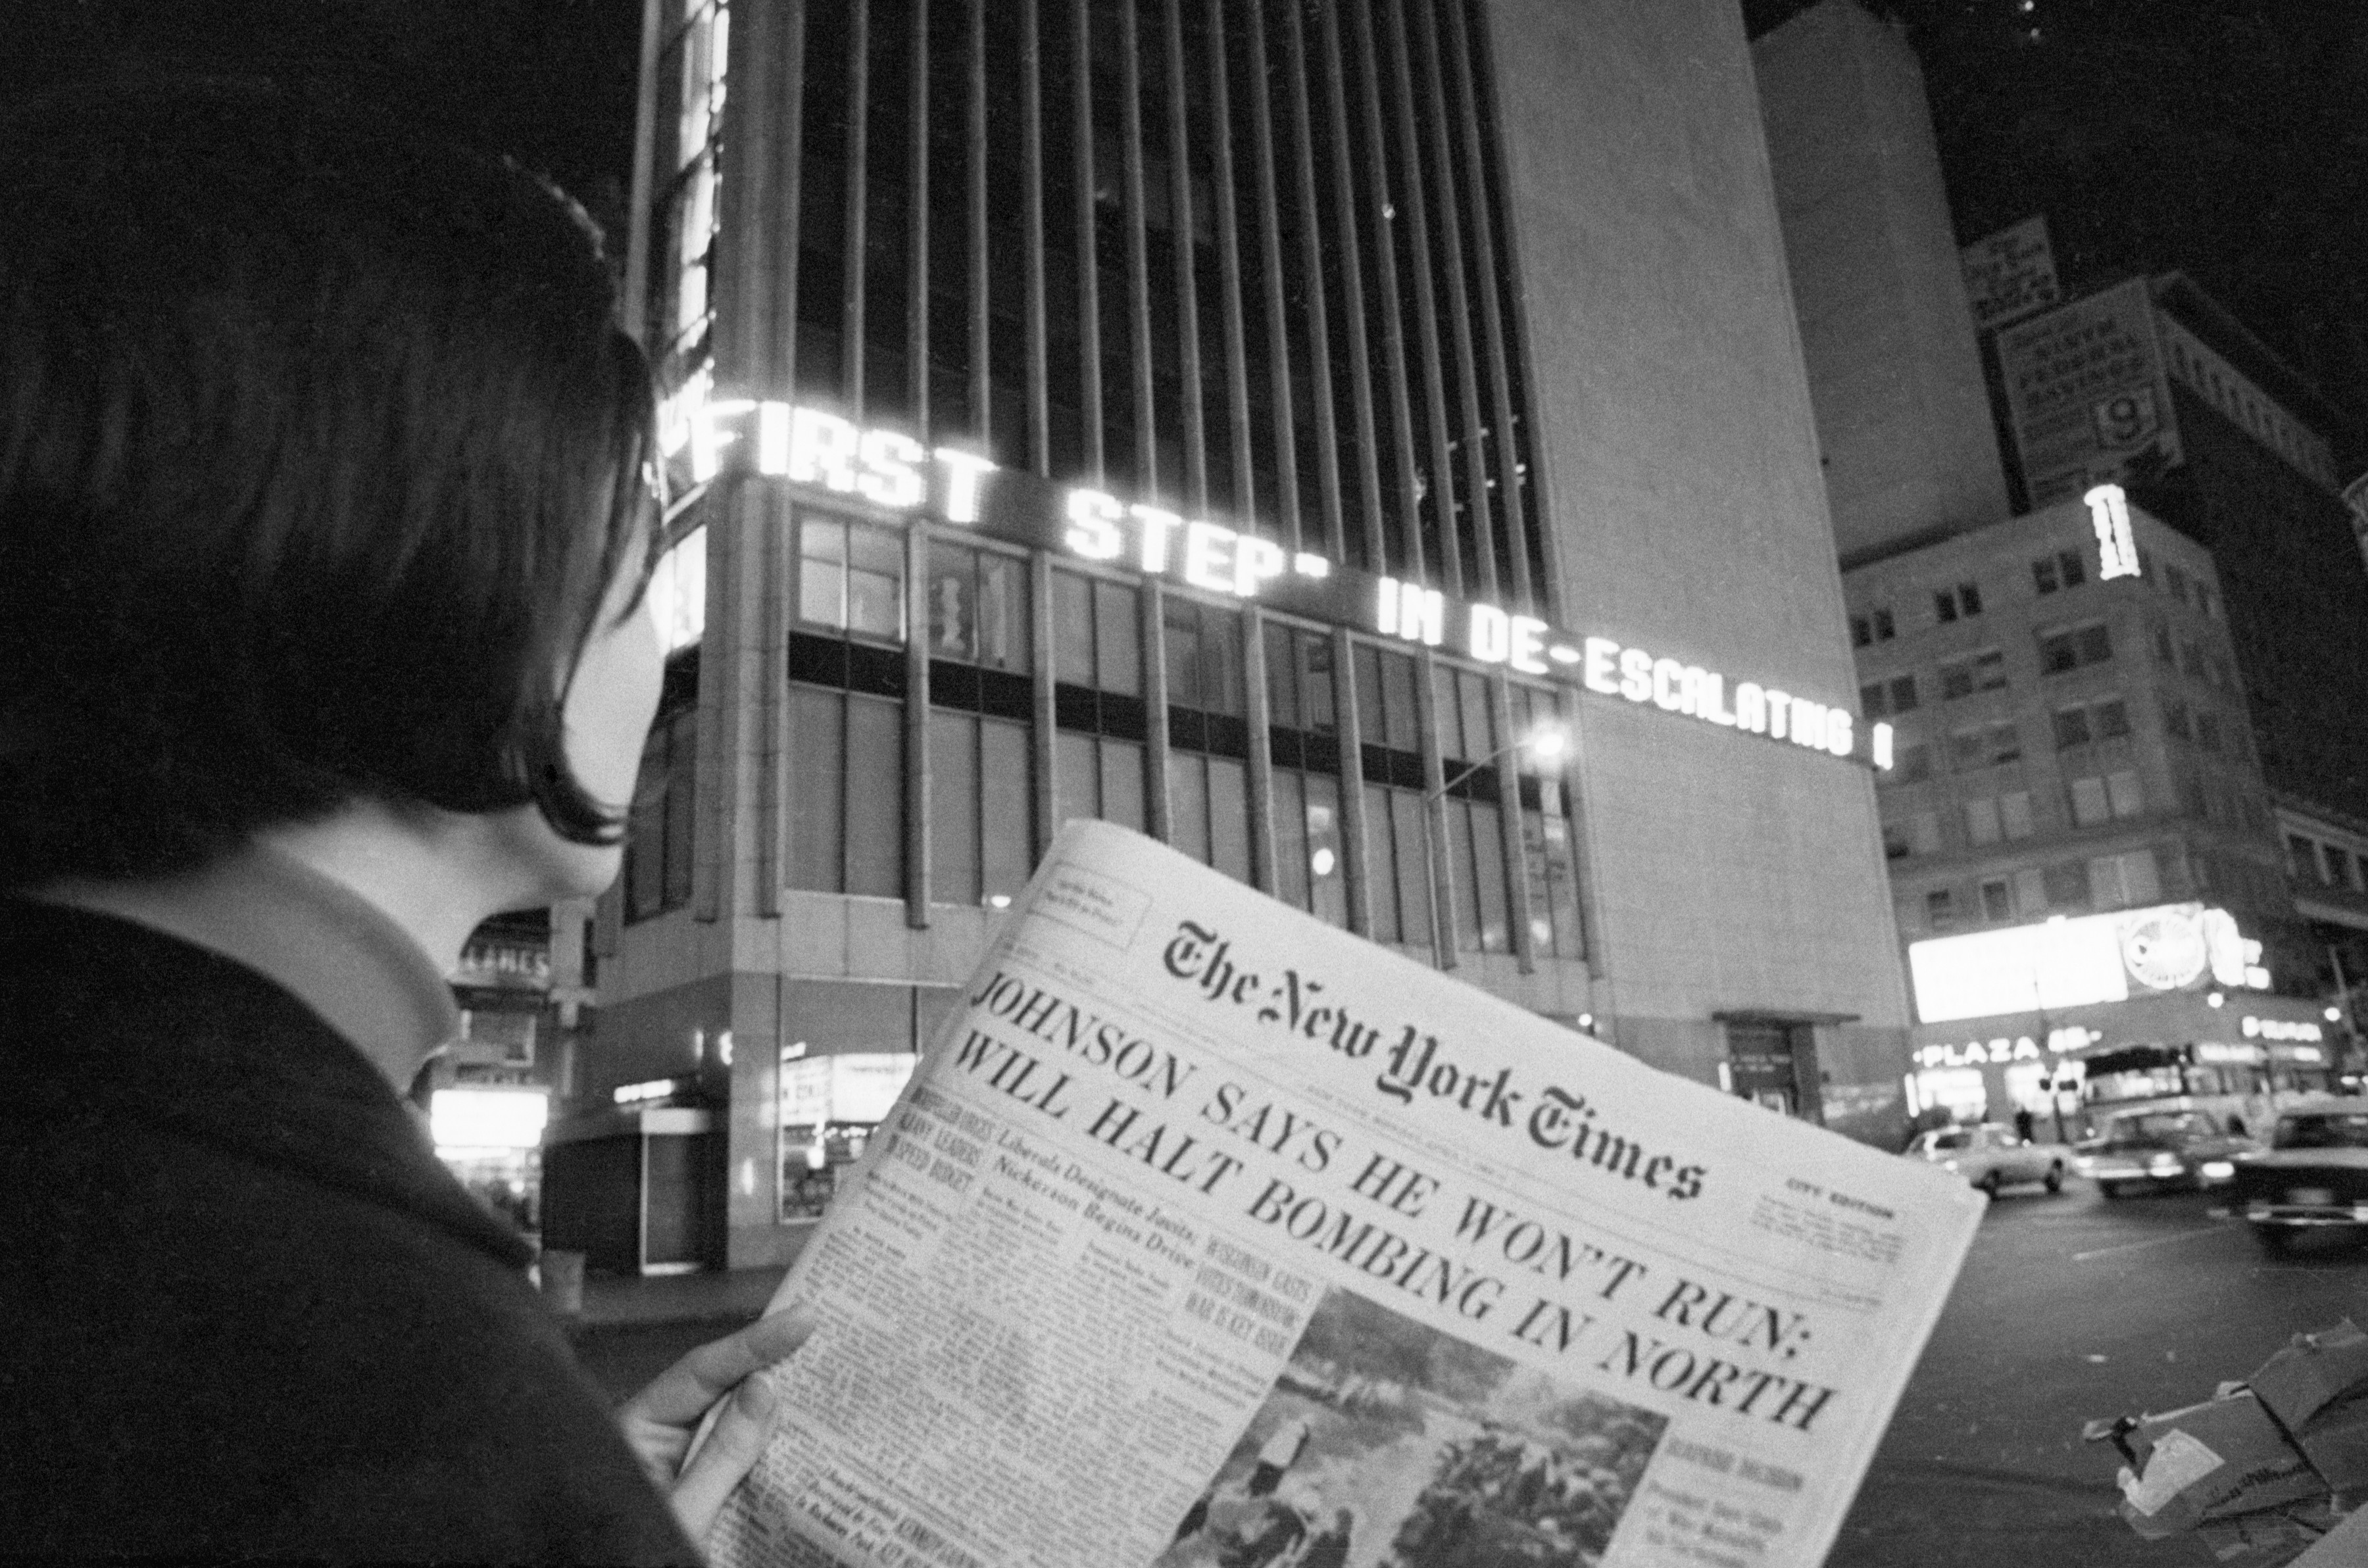 A woman reads the first page of the New York Times of Aril 1, 1968, when the headlines declared : "Johnson Says He Won't Run; Will Halt Bombing in North". This referred to President Johnson's refusal to accept or seek renomination. (Bettmann/CORBIS)